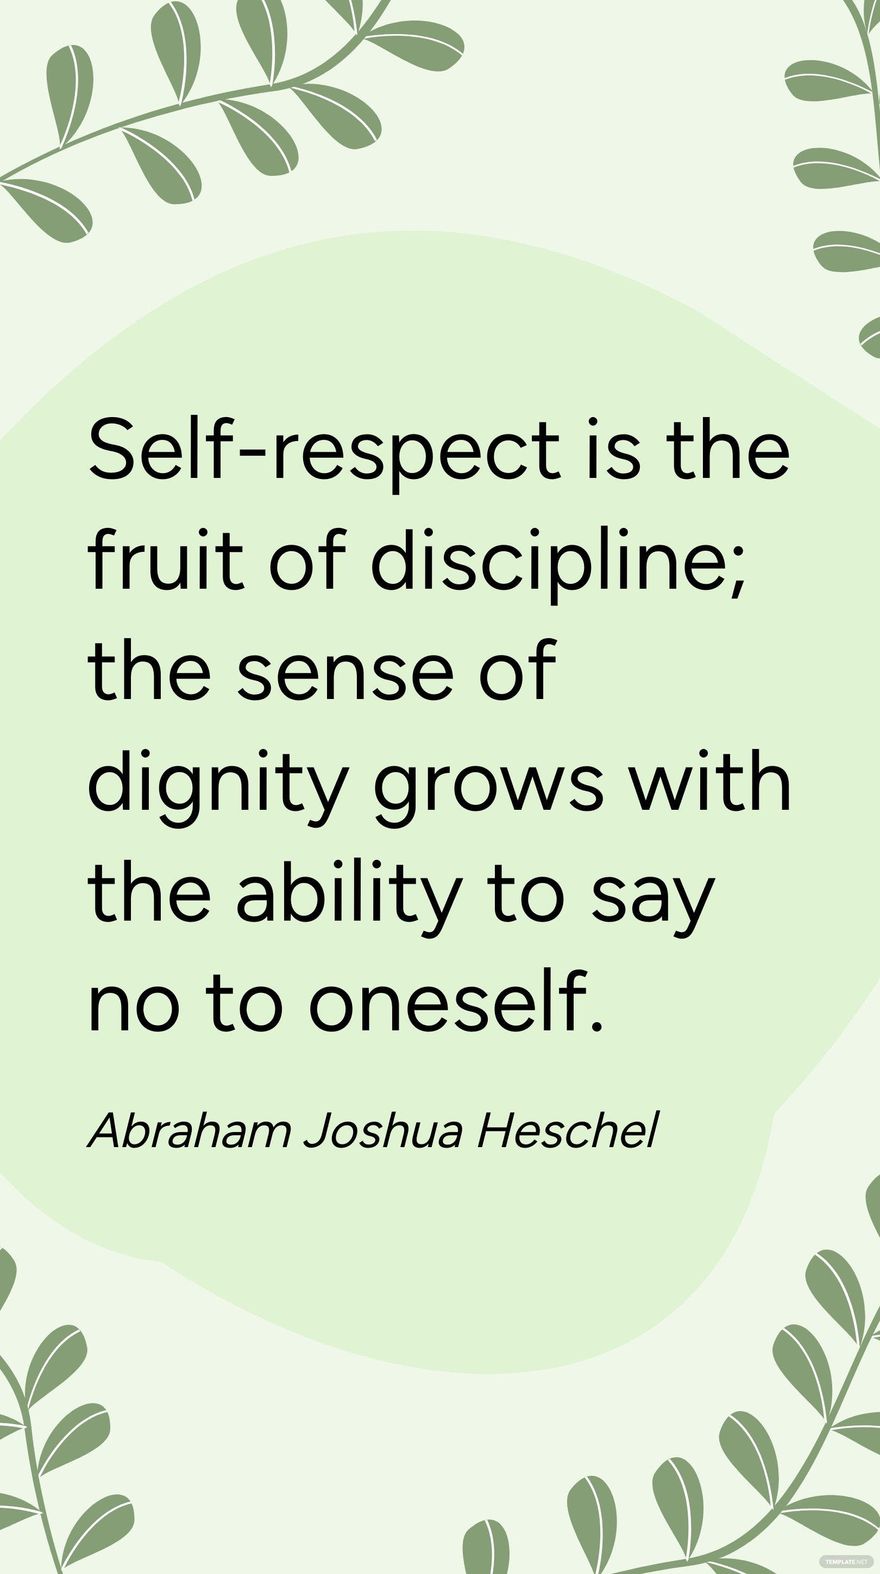 Free Abraham Joshua Heschel - Self-respect is the fruit of discipline; the sense of dignity grows with the ability to say no to oneself. in JPG